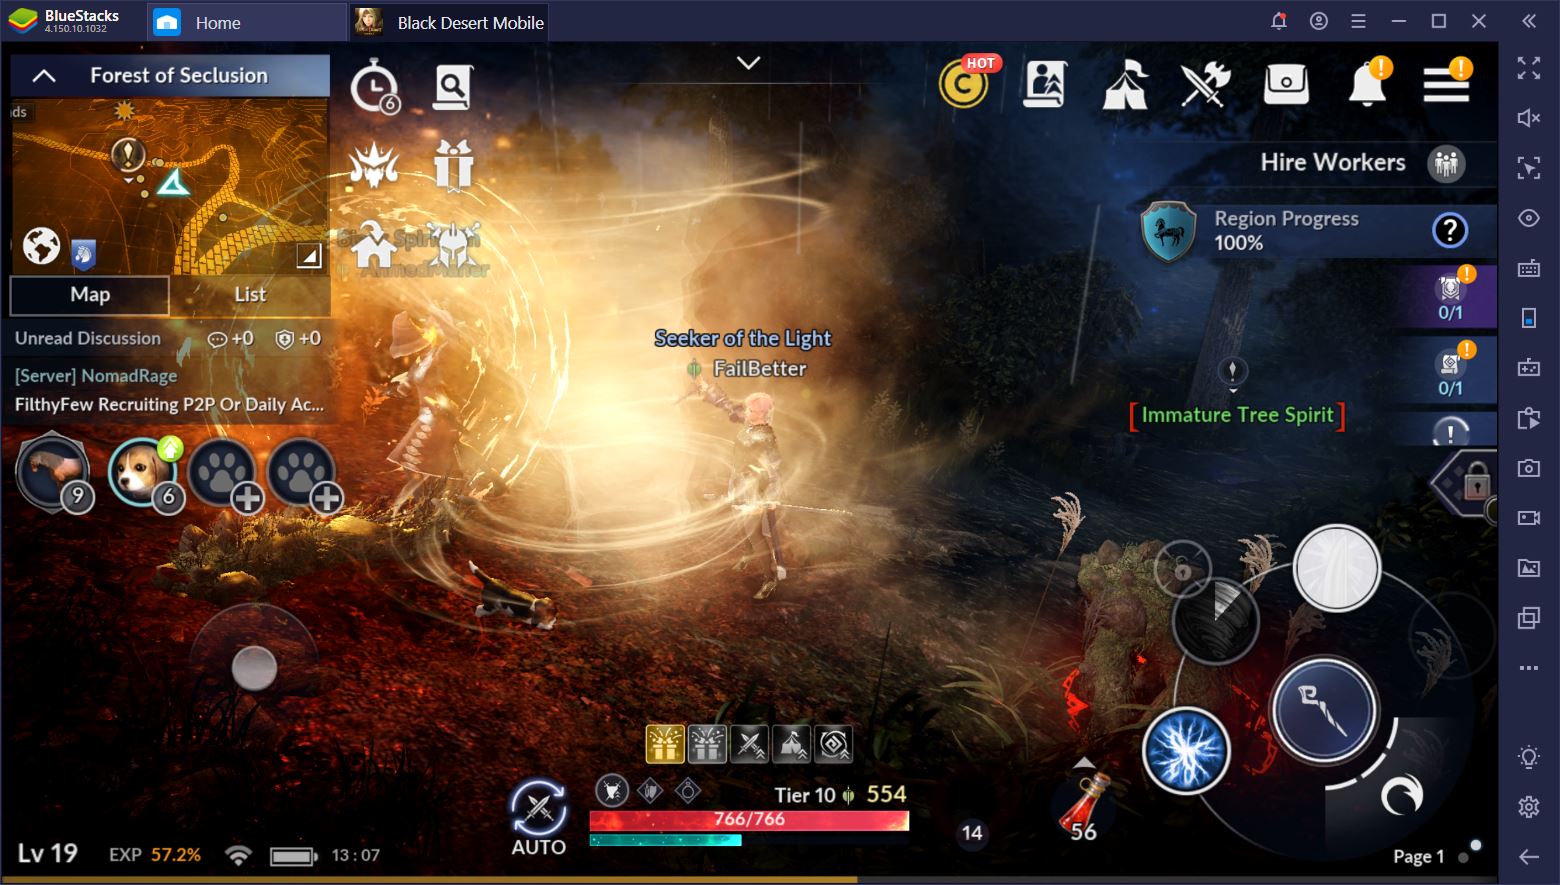 Black Desert Mobile: How to Level Up Quickly